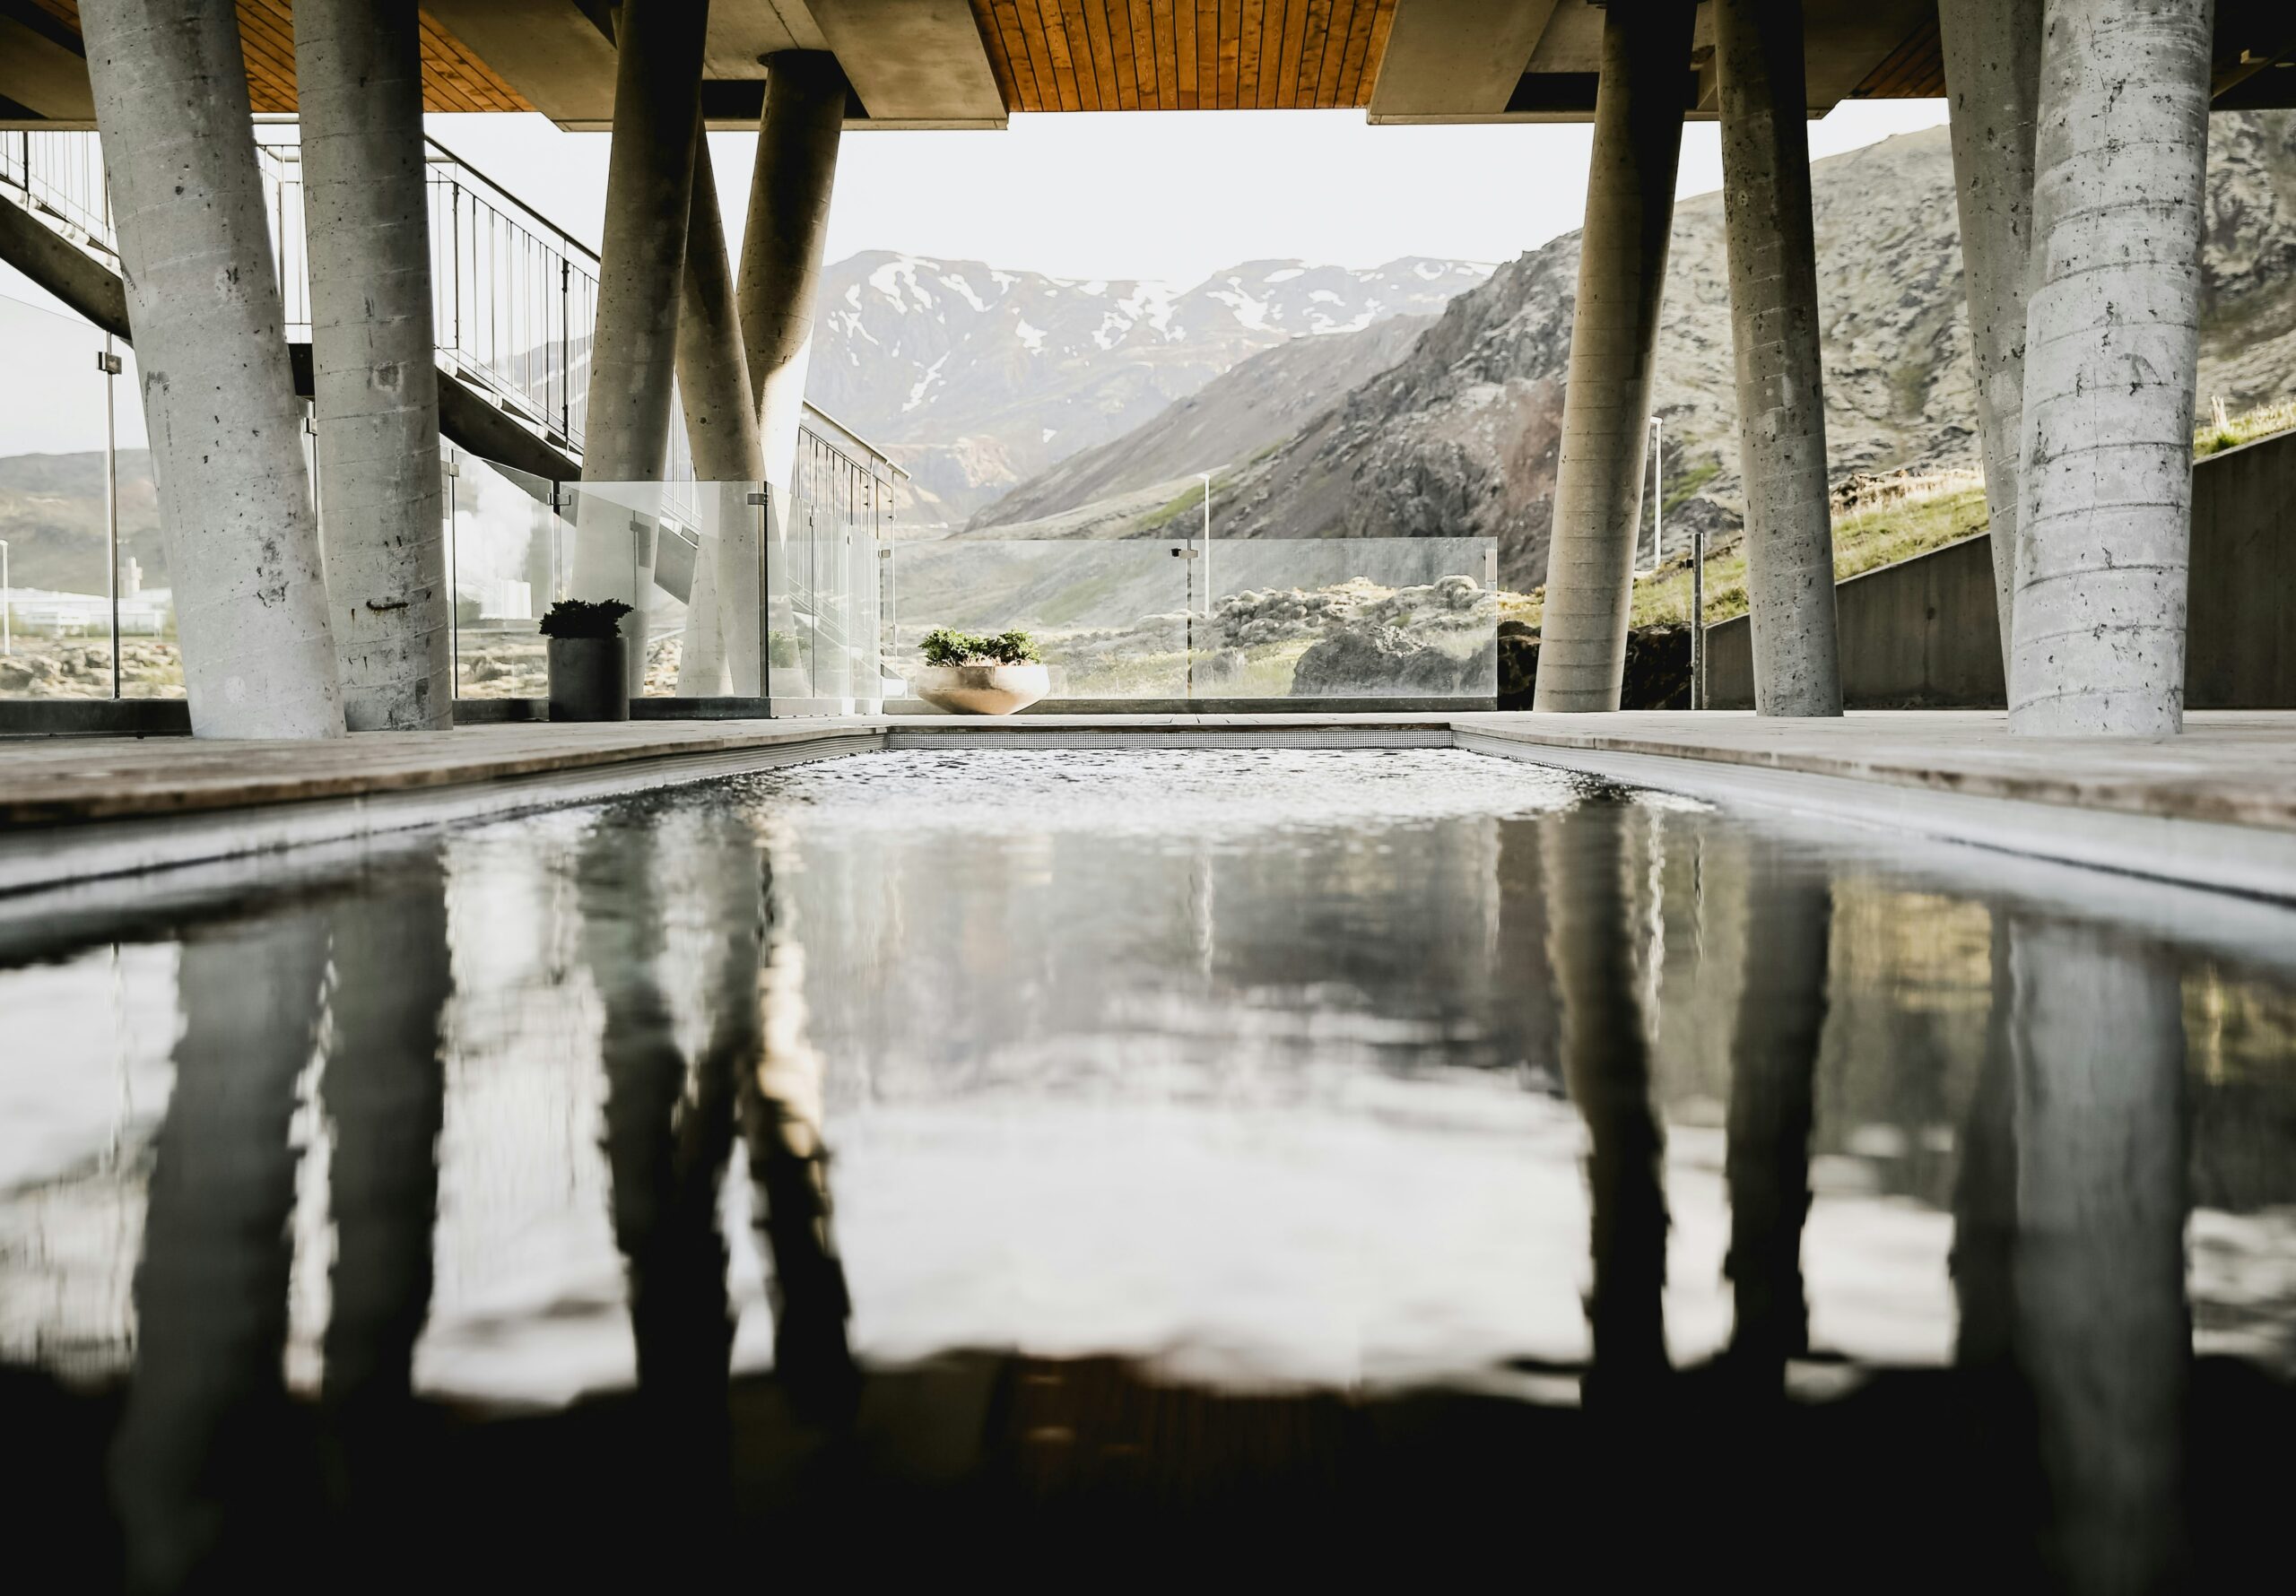 Here are reasons travelers should visit Iceland and things to consider when selecting a luxury hotel. 
Pictured: a resort with a large pool under a terrace overlooking the snowy peaks of Iceland